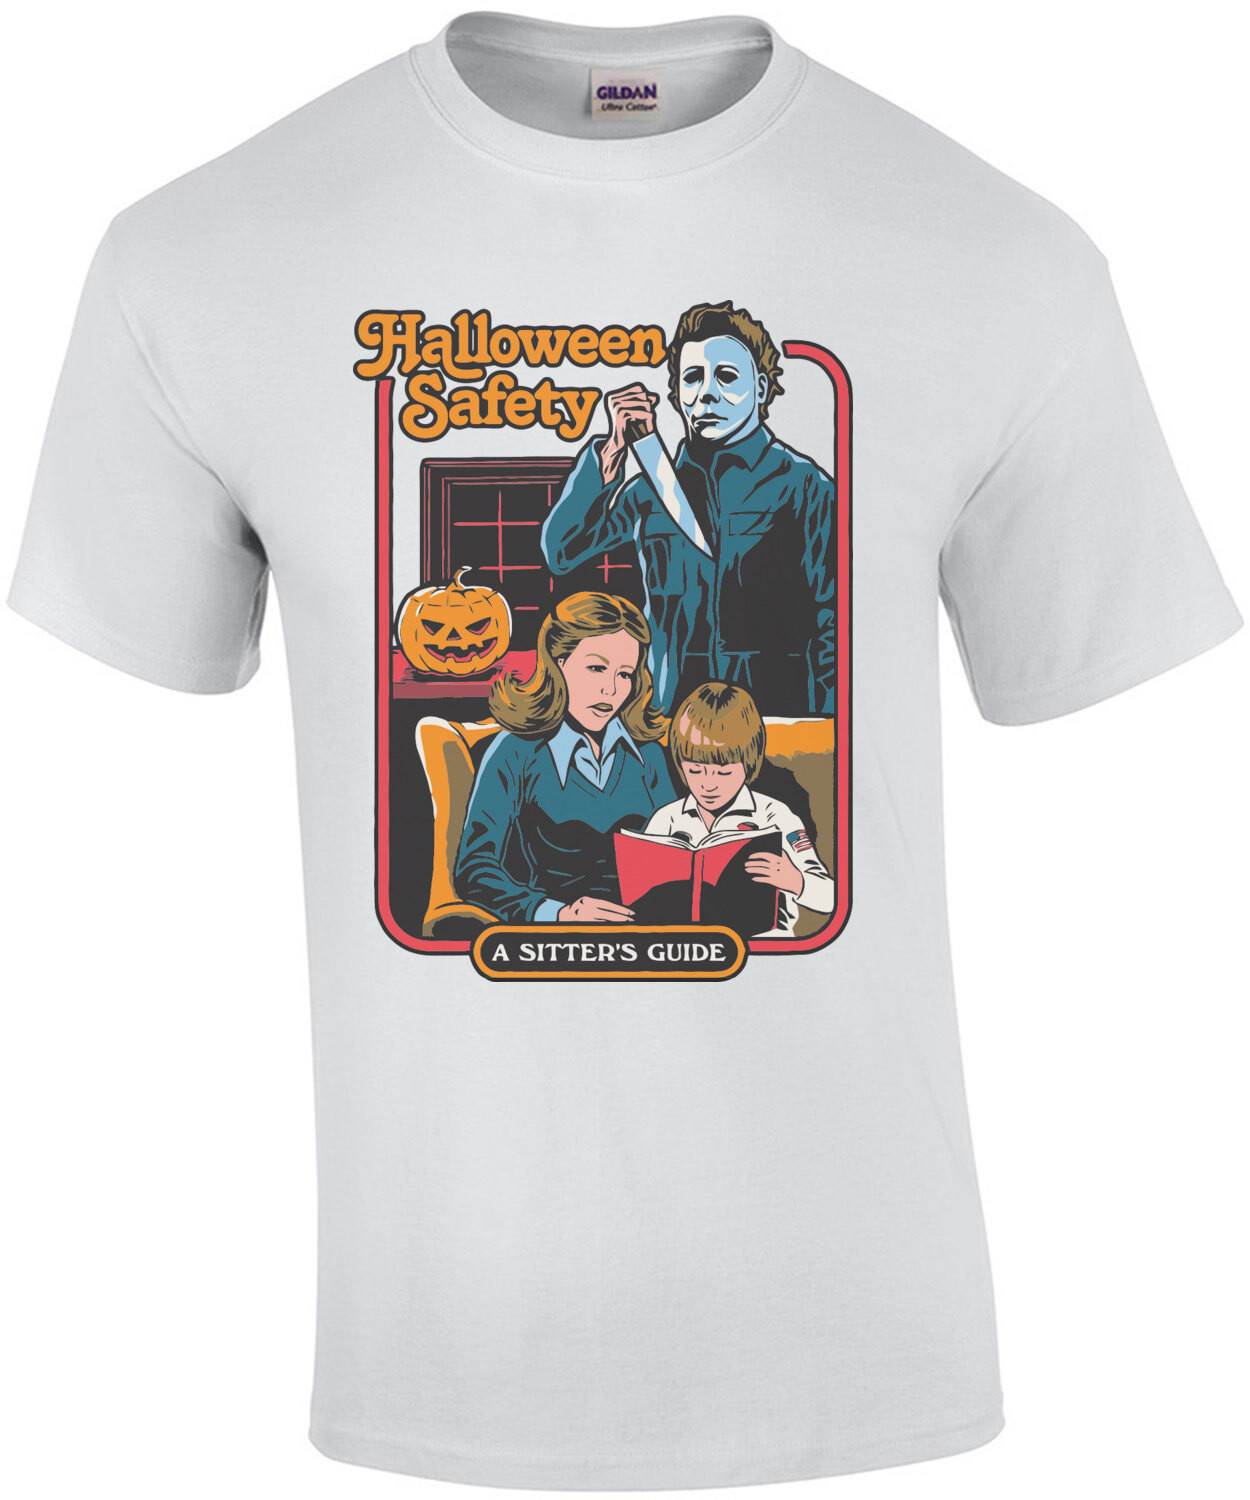 Halloween Safety a Sitter's Guide Funny Shirt